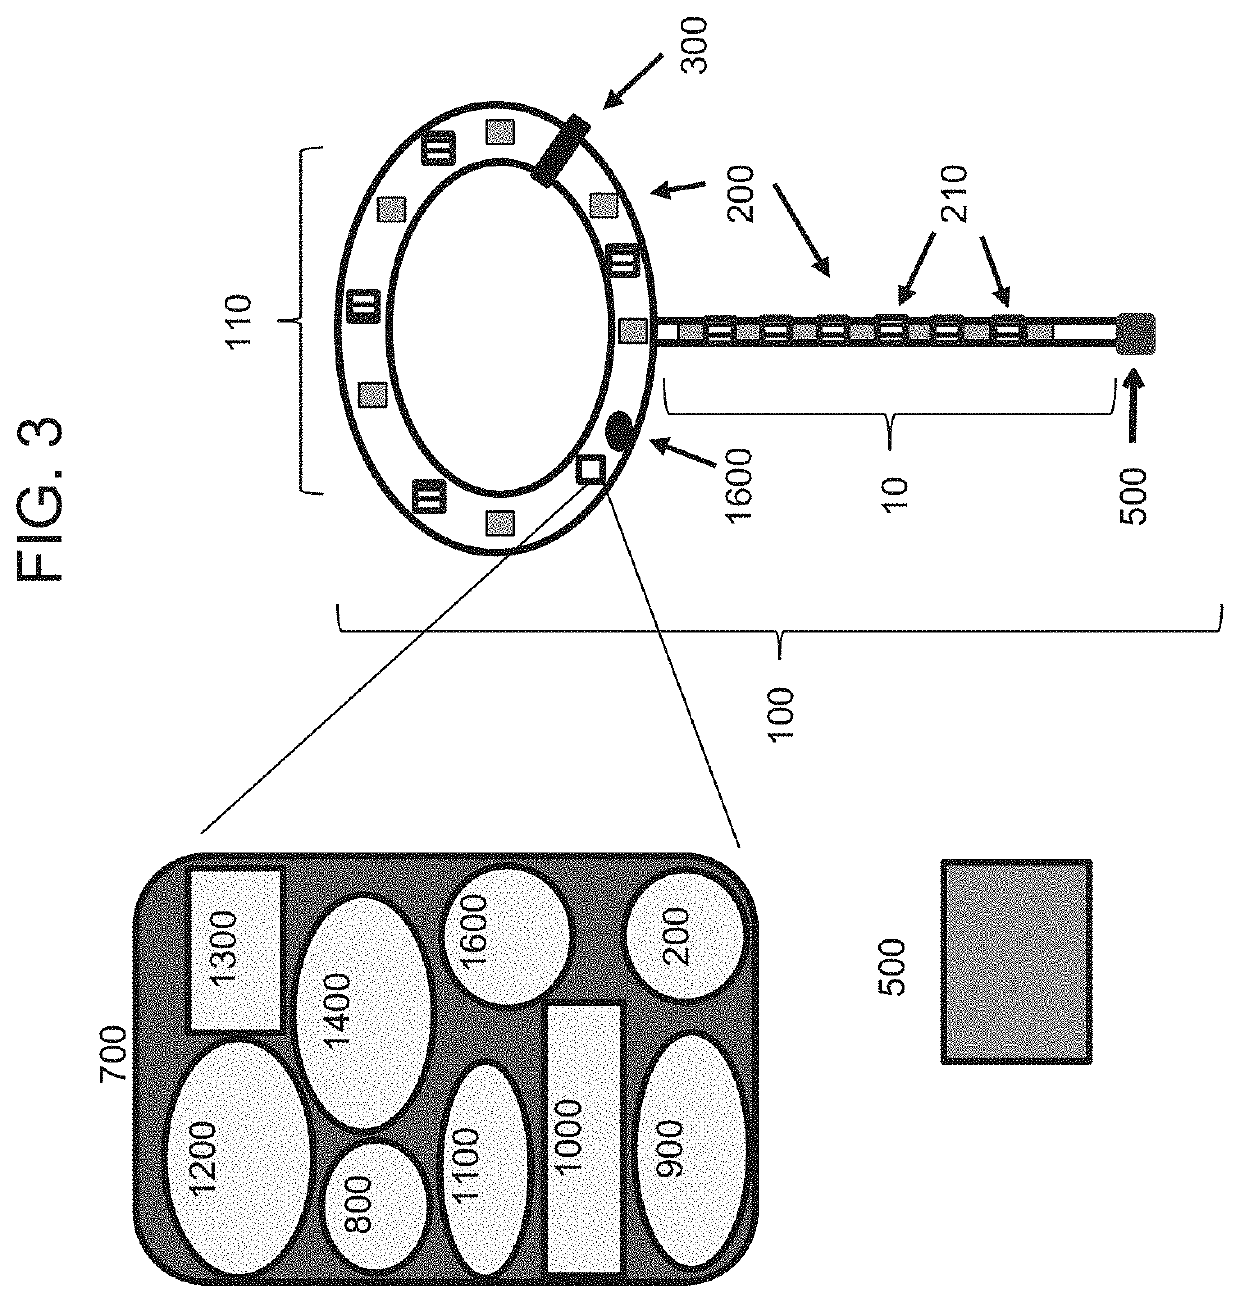 Devices, systems, and methods for monitoring bladder function